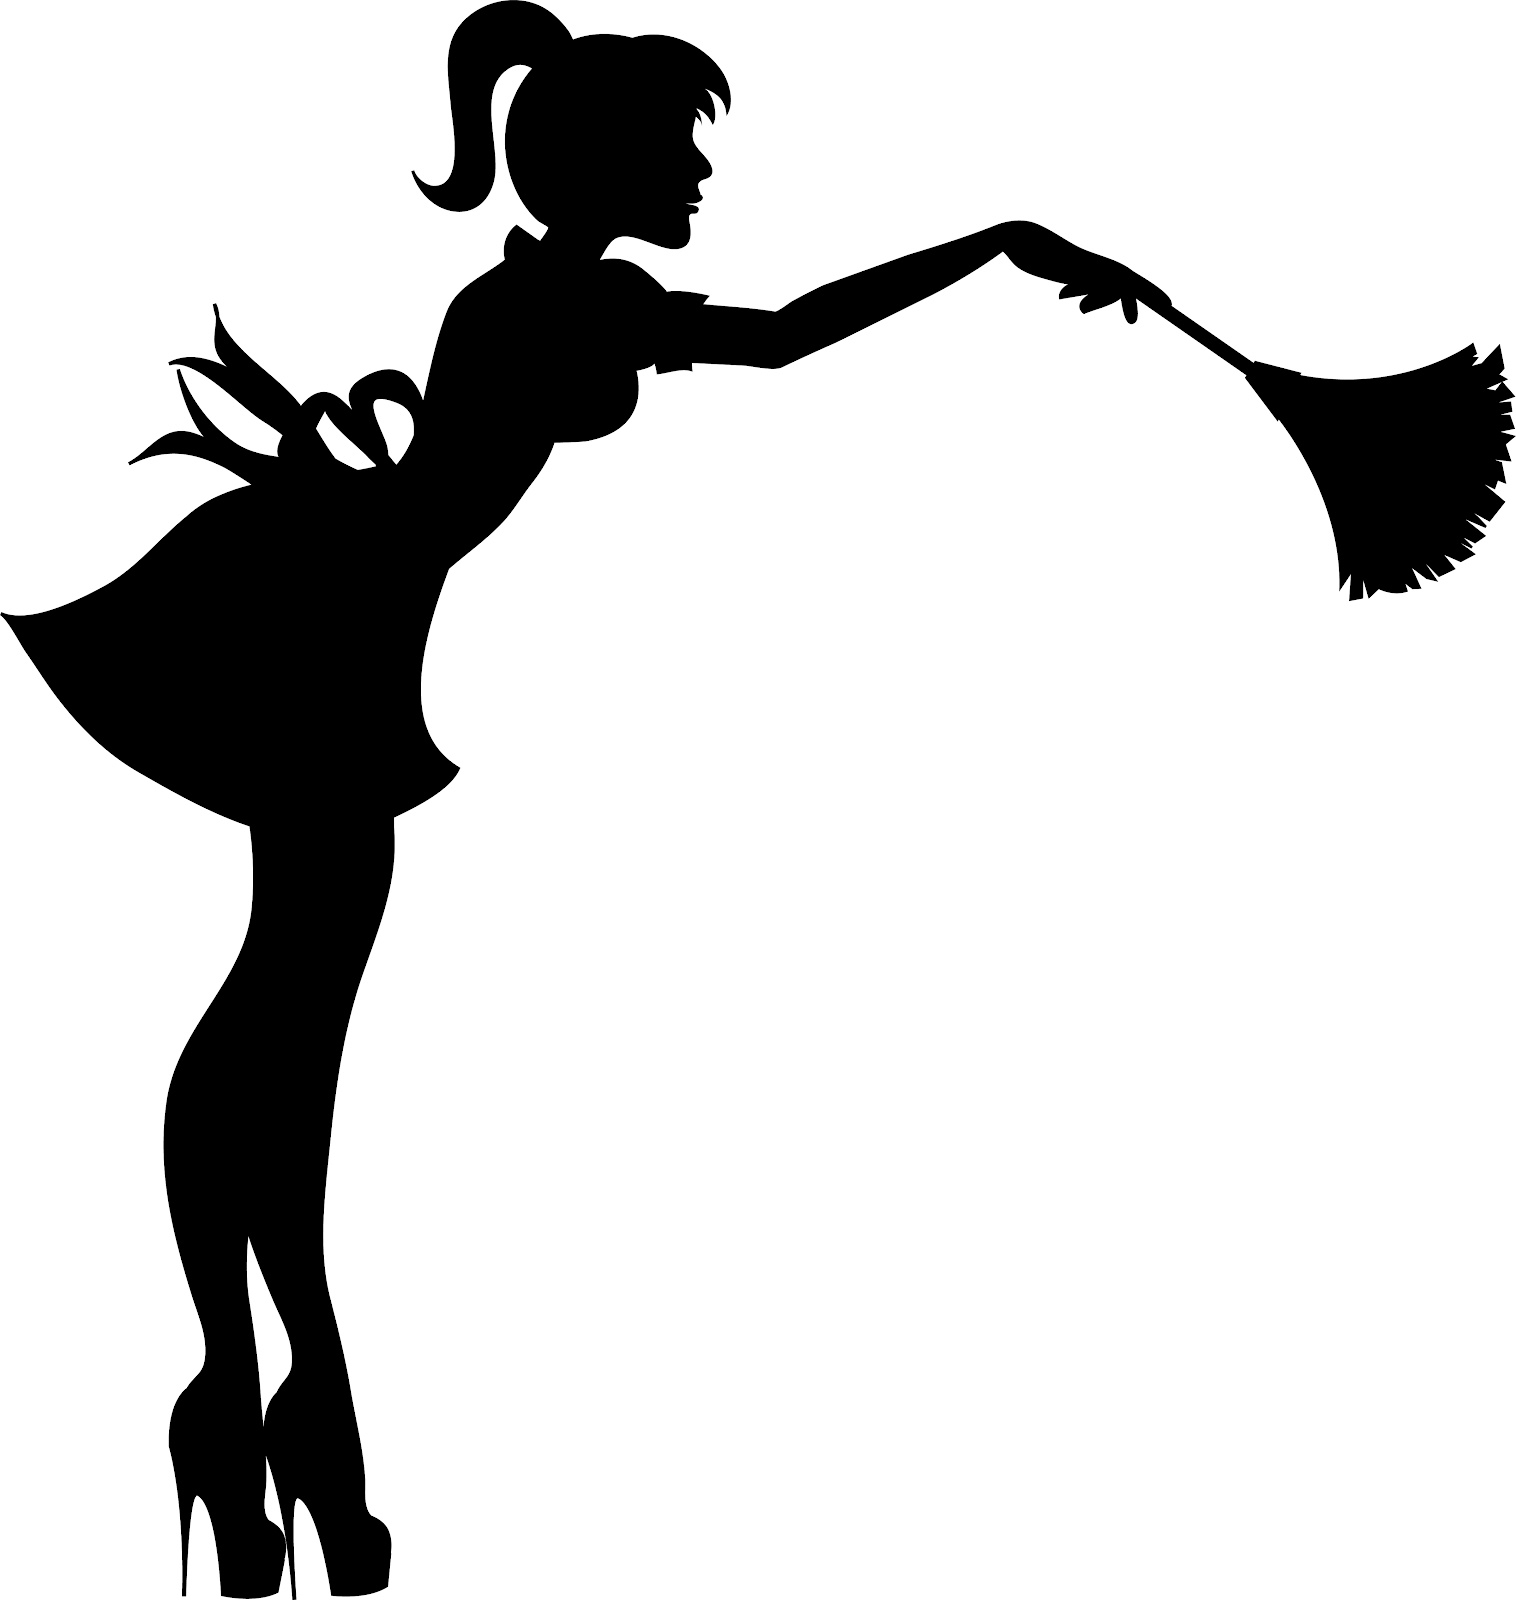 Free Clip Art by Pam: New Maid Clipart!